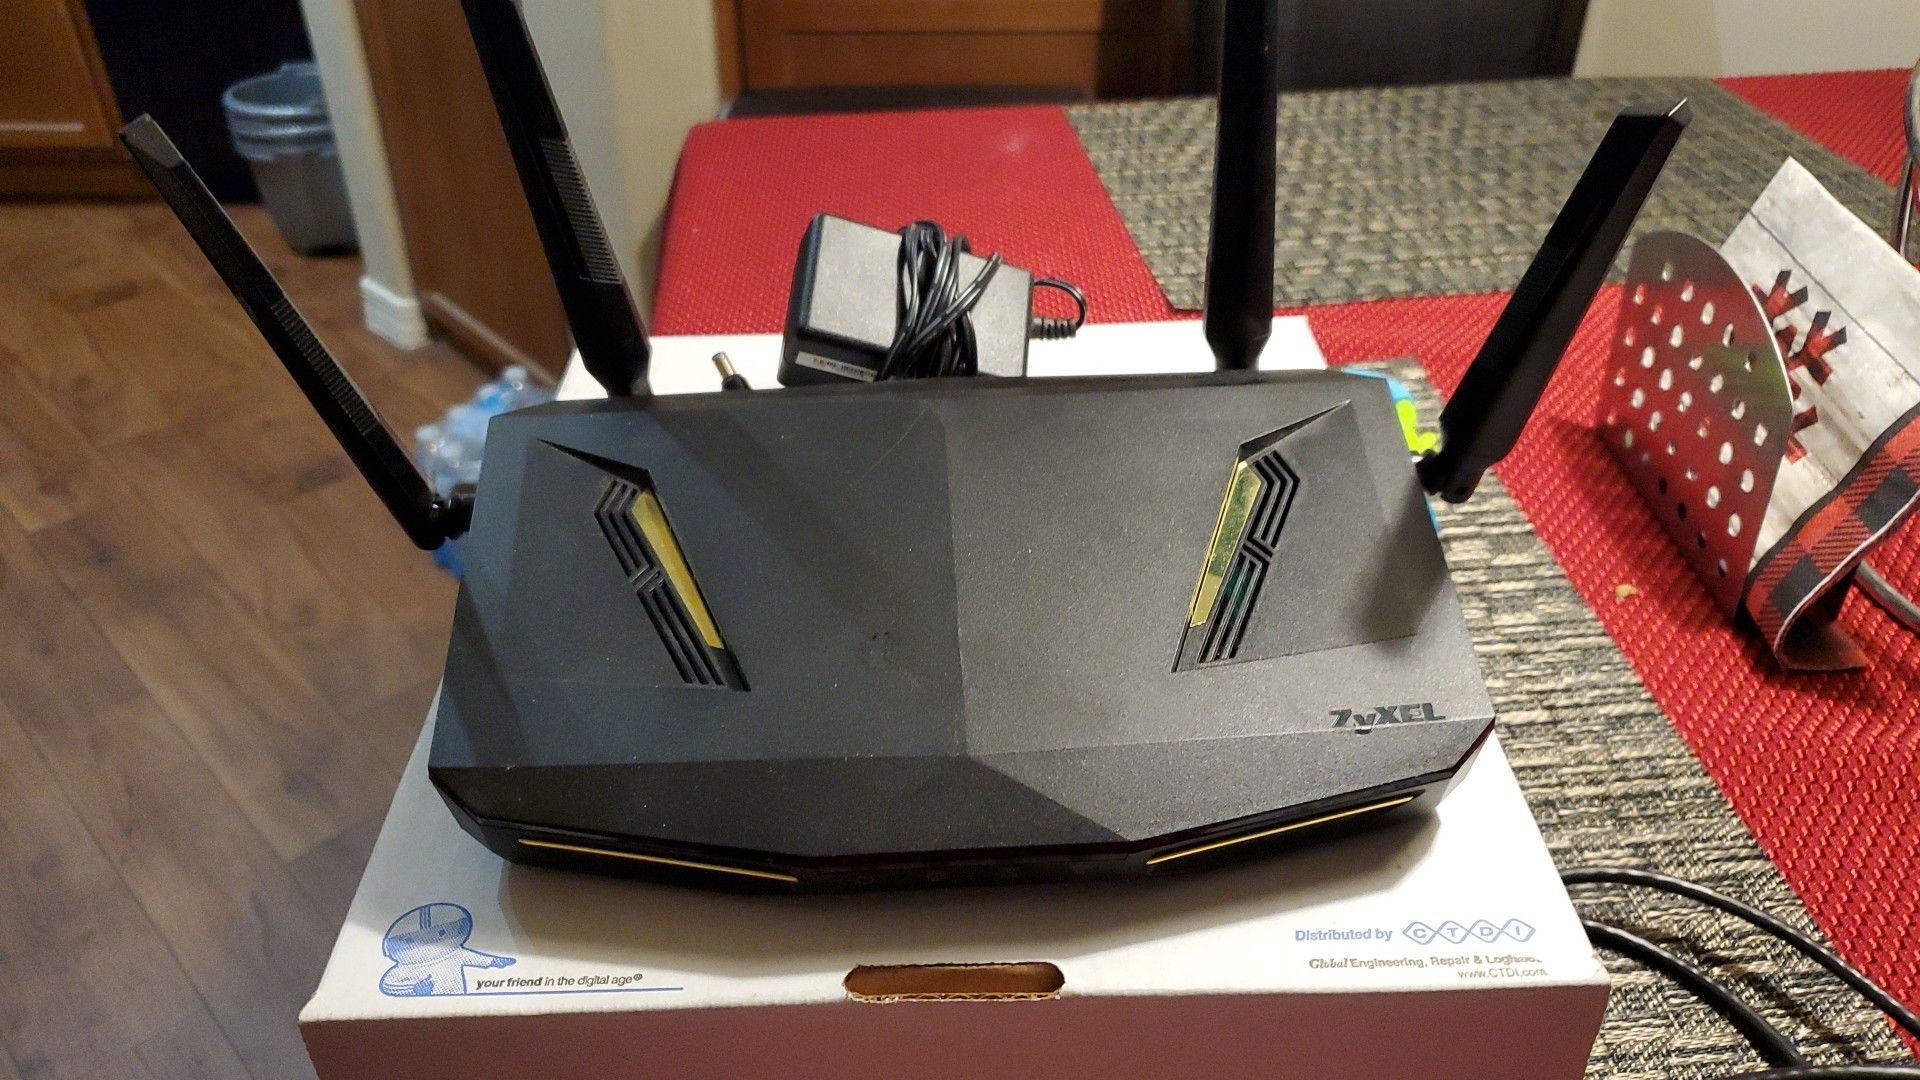 Modem and wireless router